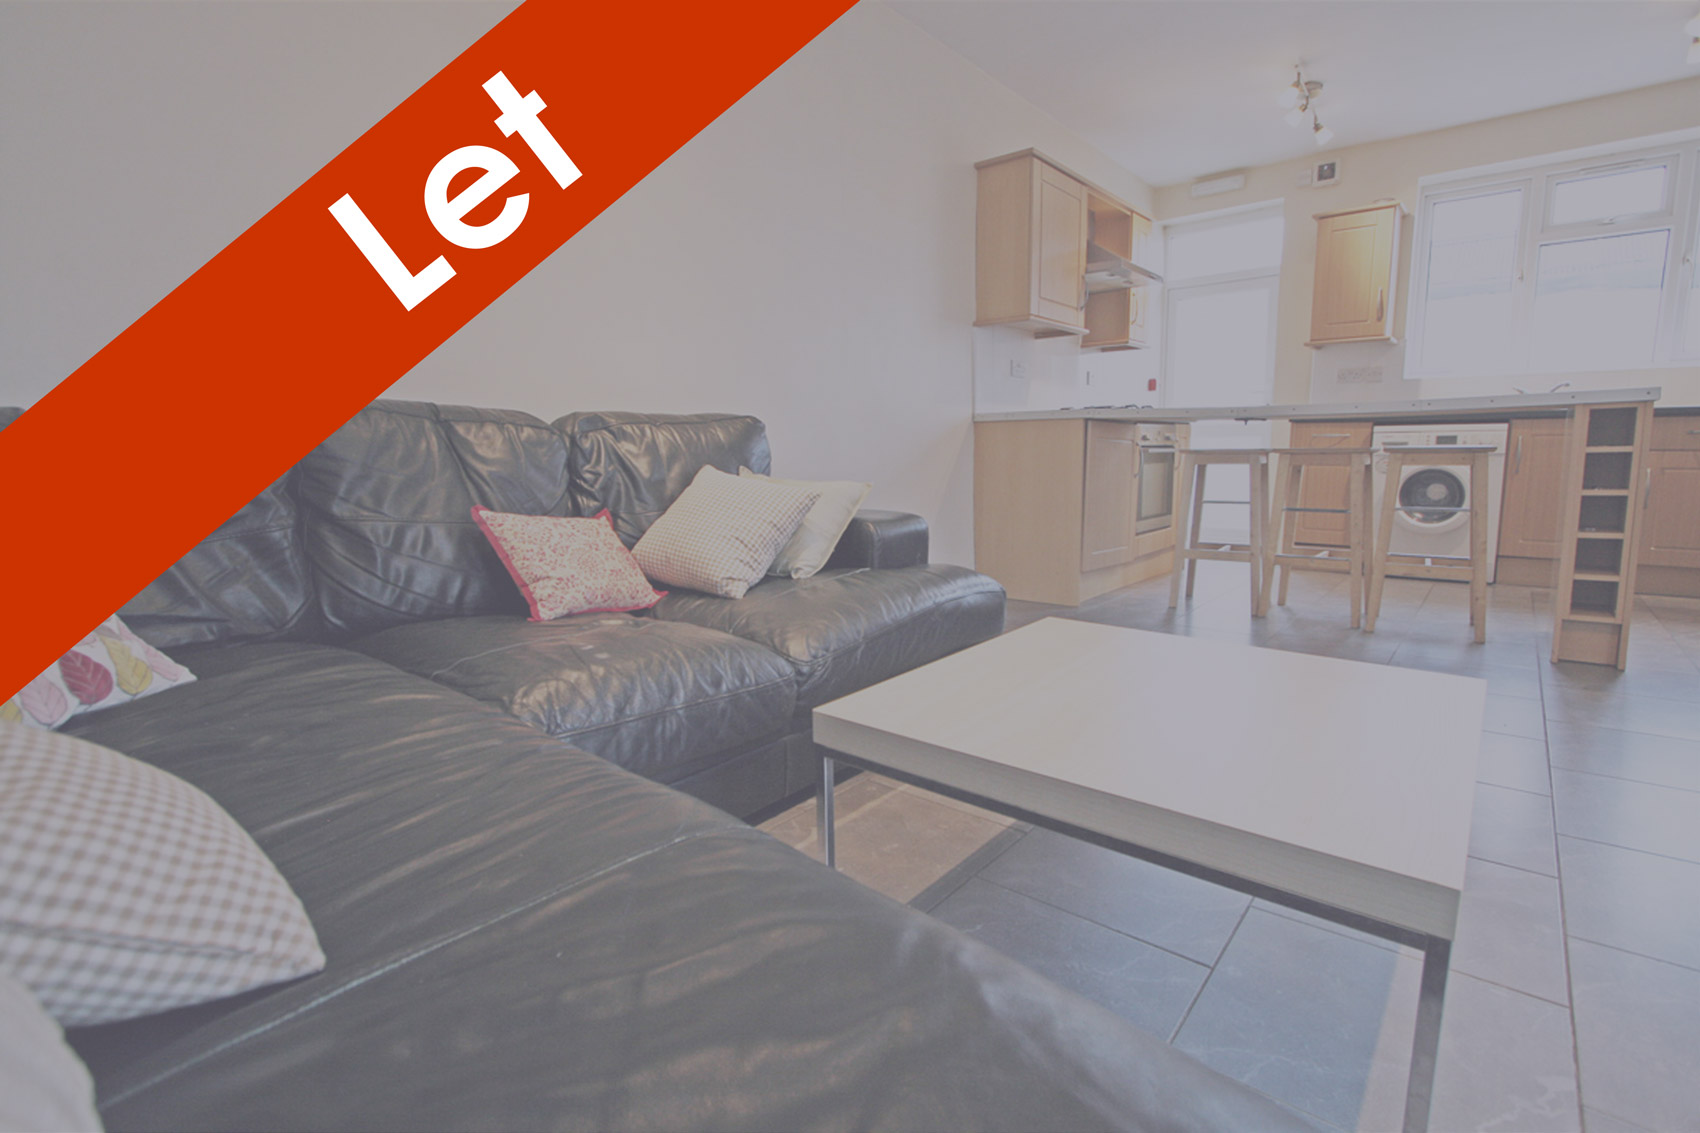 Arabella St, Roath/Cathays – 6 Bed House